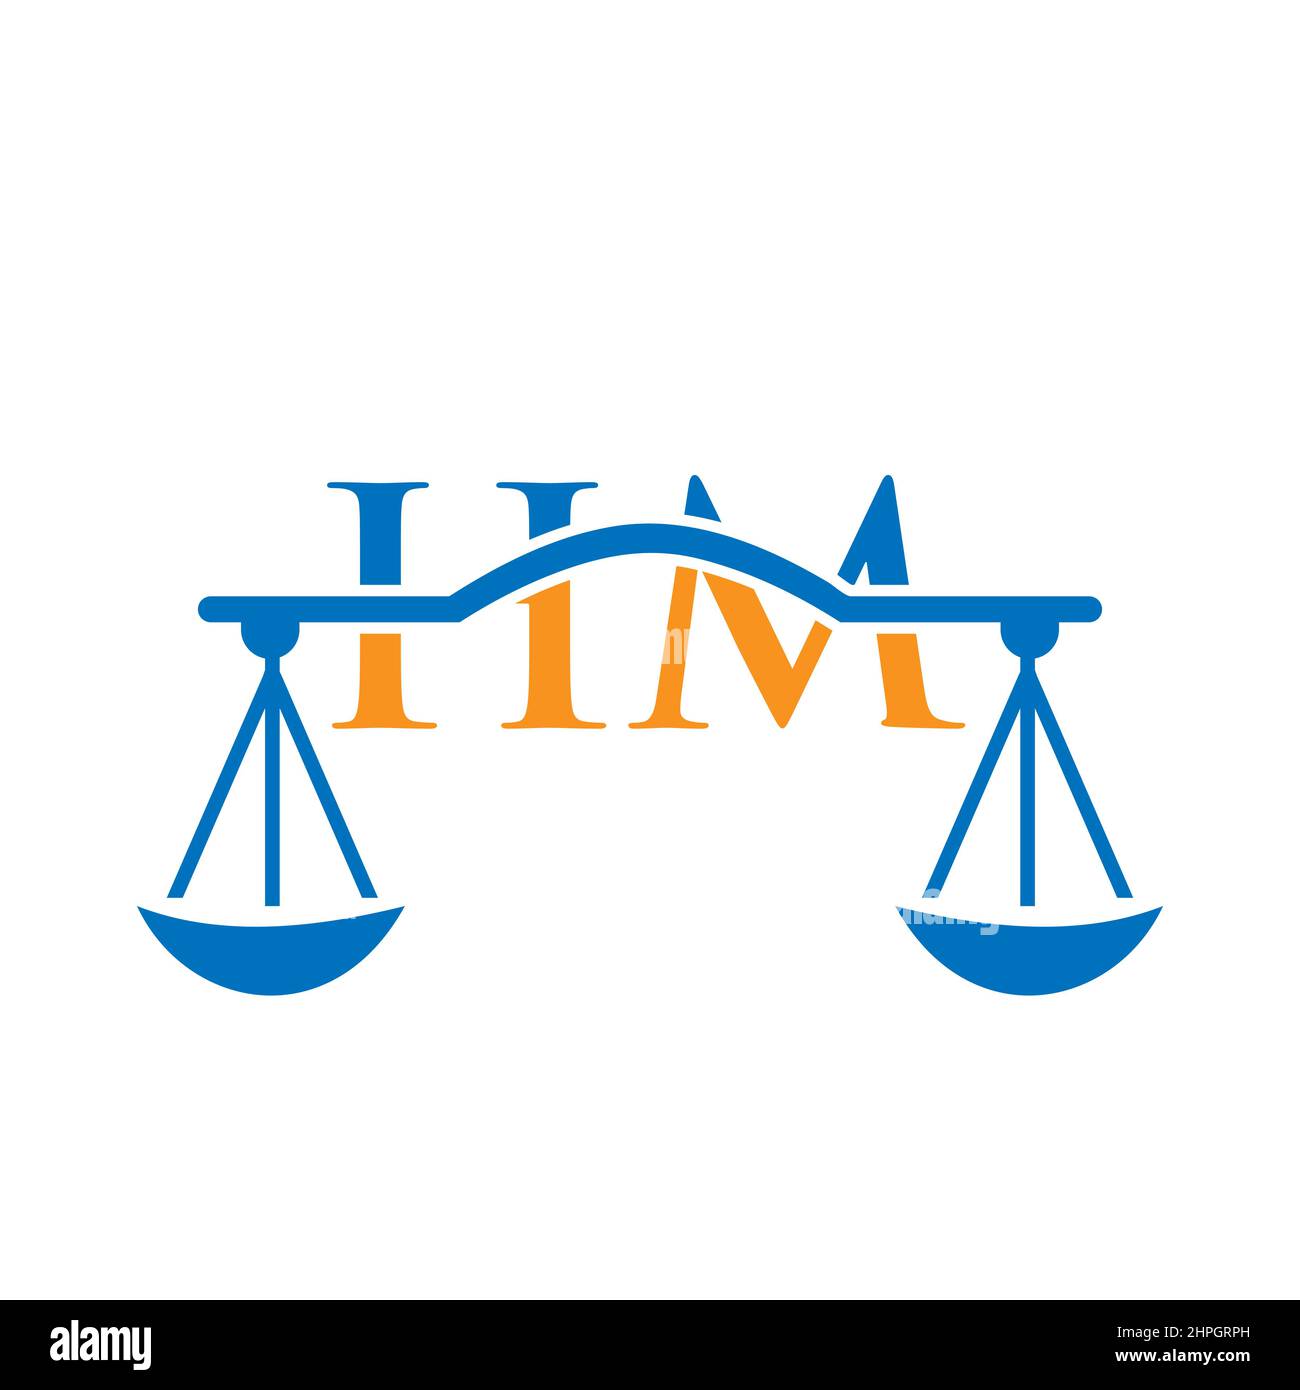 Law Firm Letter HM Logo Design. Lawyer, Law Attorney Lawyer Service, Law Office, Scale. Law Firm Logo On Letter HM Vector Sign Stock Vector